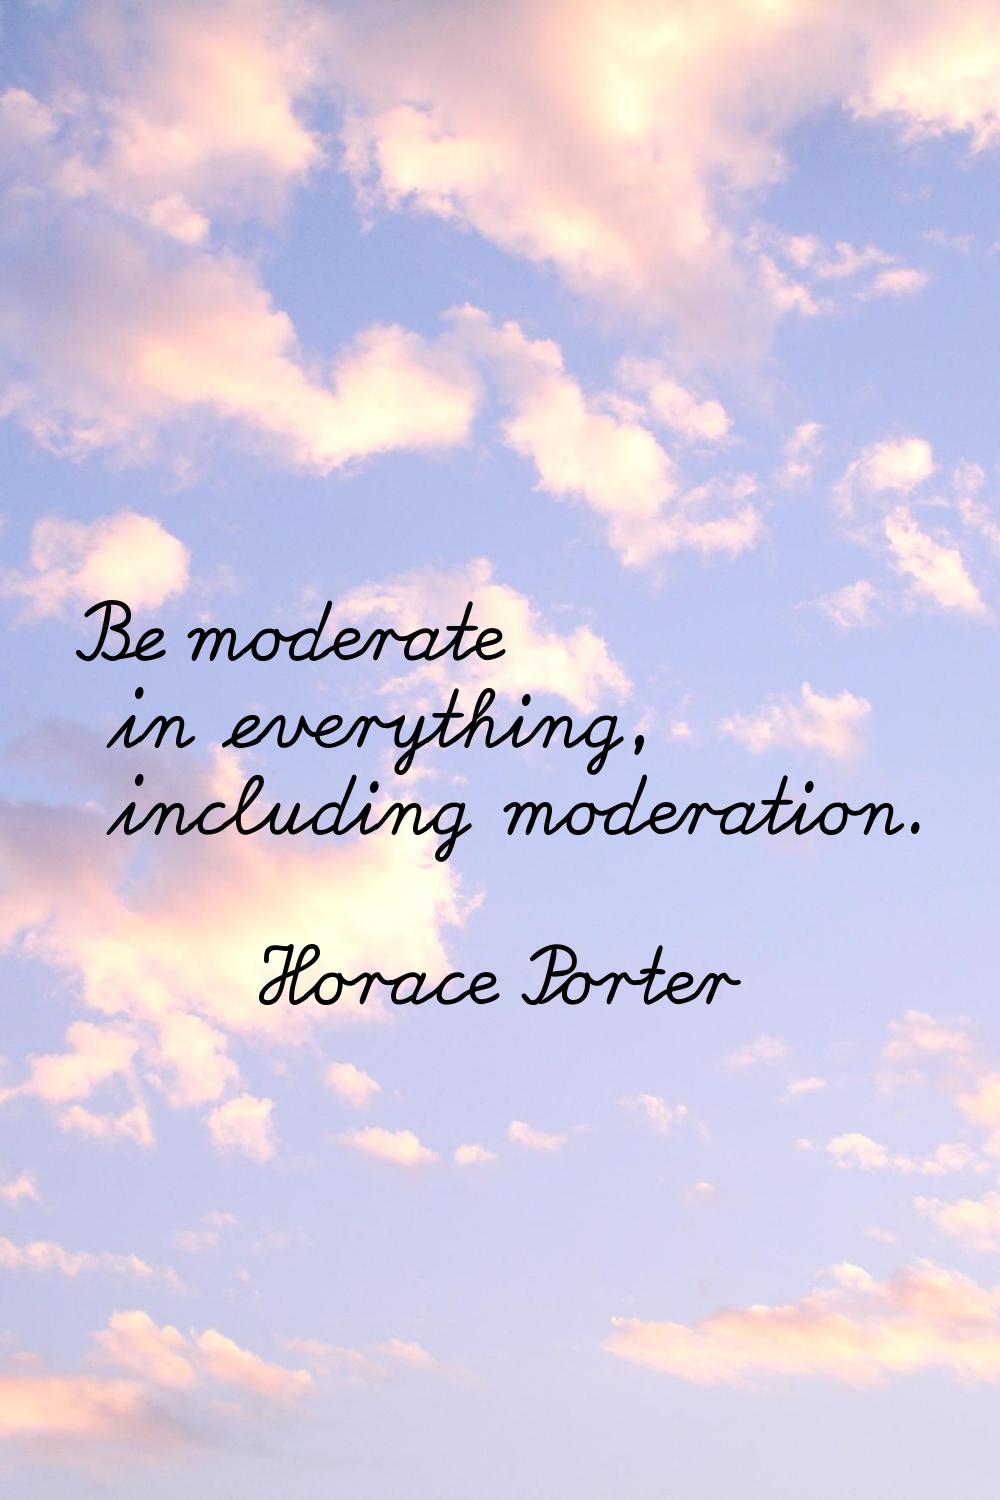 Be moderate in everything, including moderation.